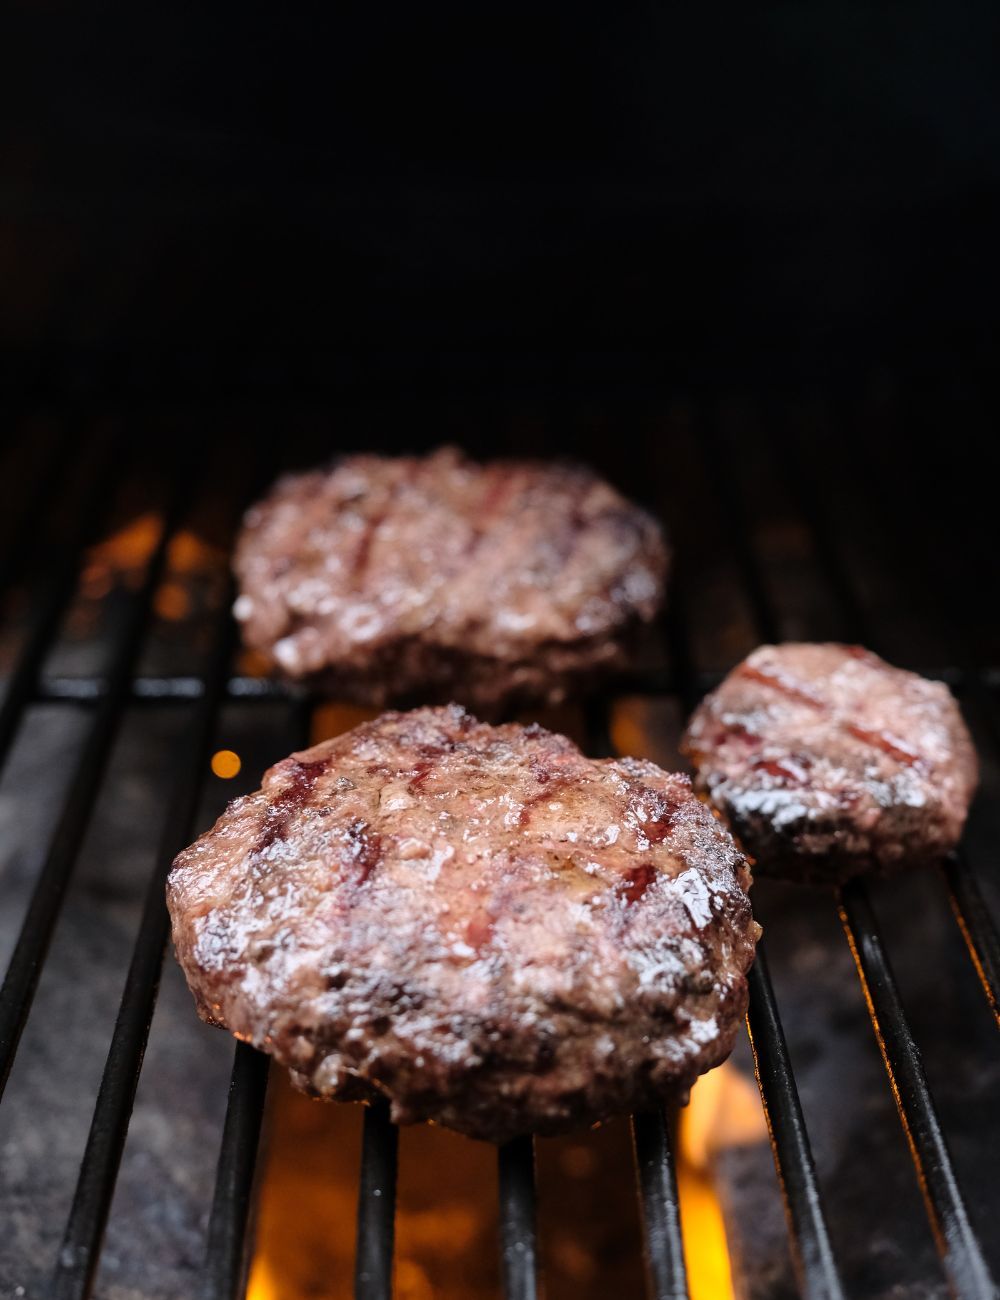 3 Juicy burgers being grilled! Good sear marks.